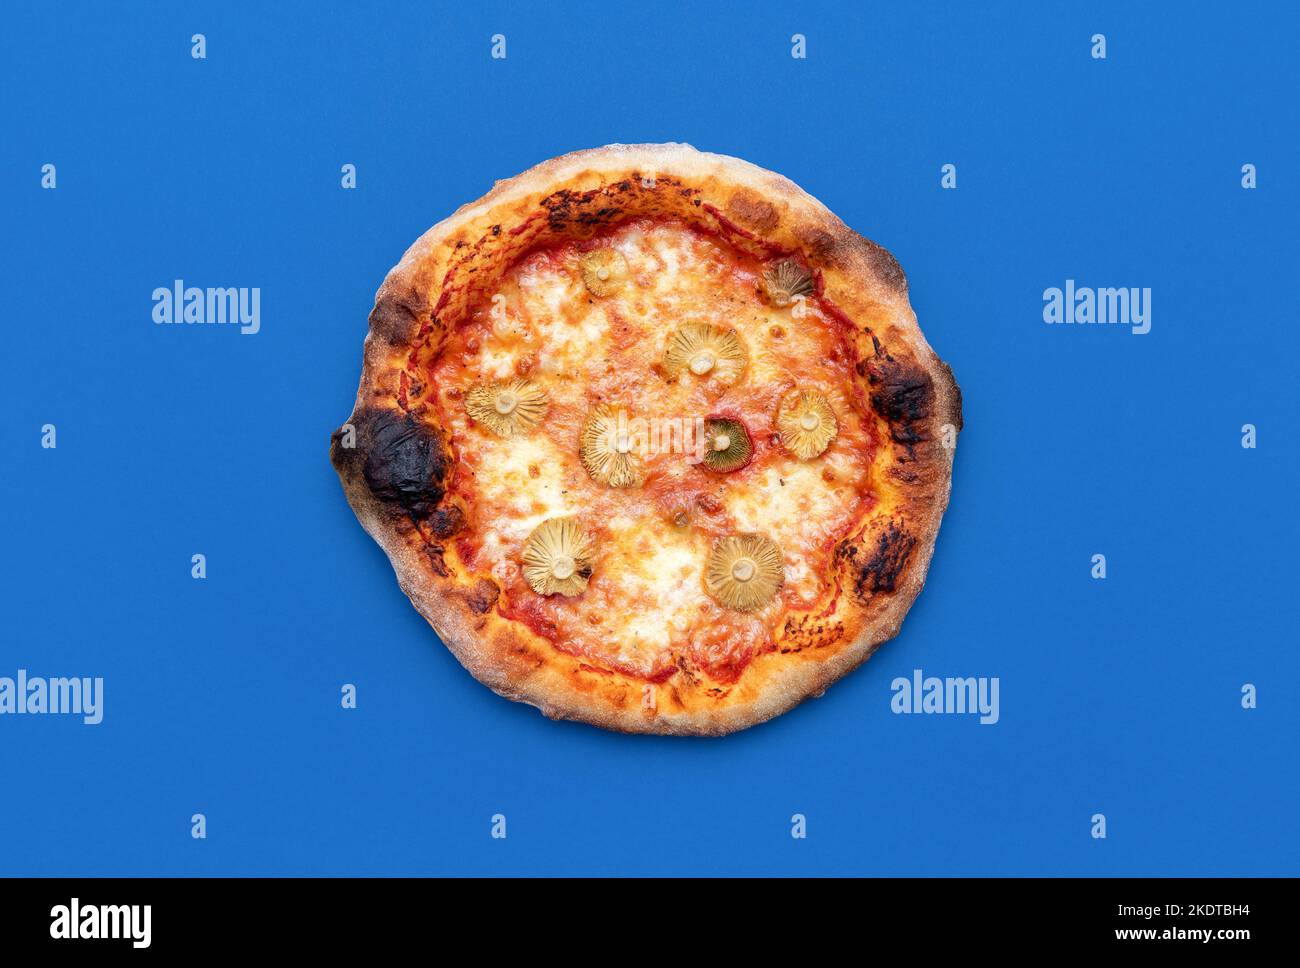 Above view with a homemade vegetarian pizza minimalist on a blue table. Delicious pizza with wild edible mushrooms, mozzarella and tomato sauce. Stock Photo